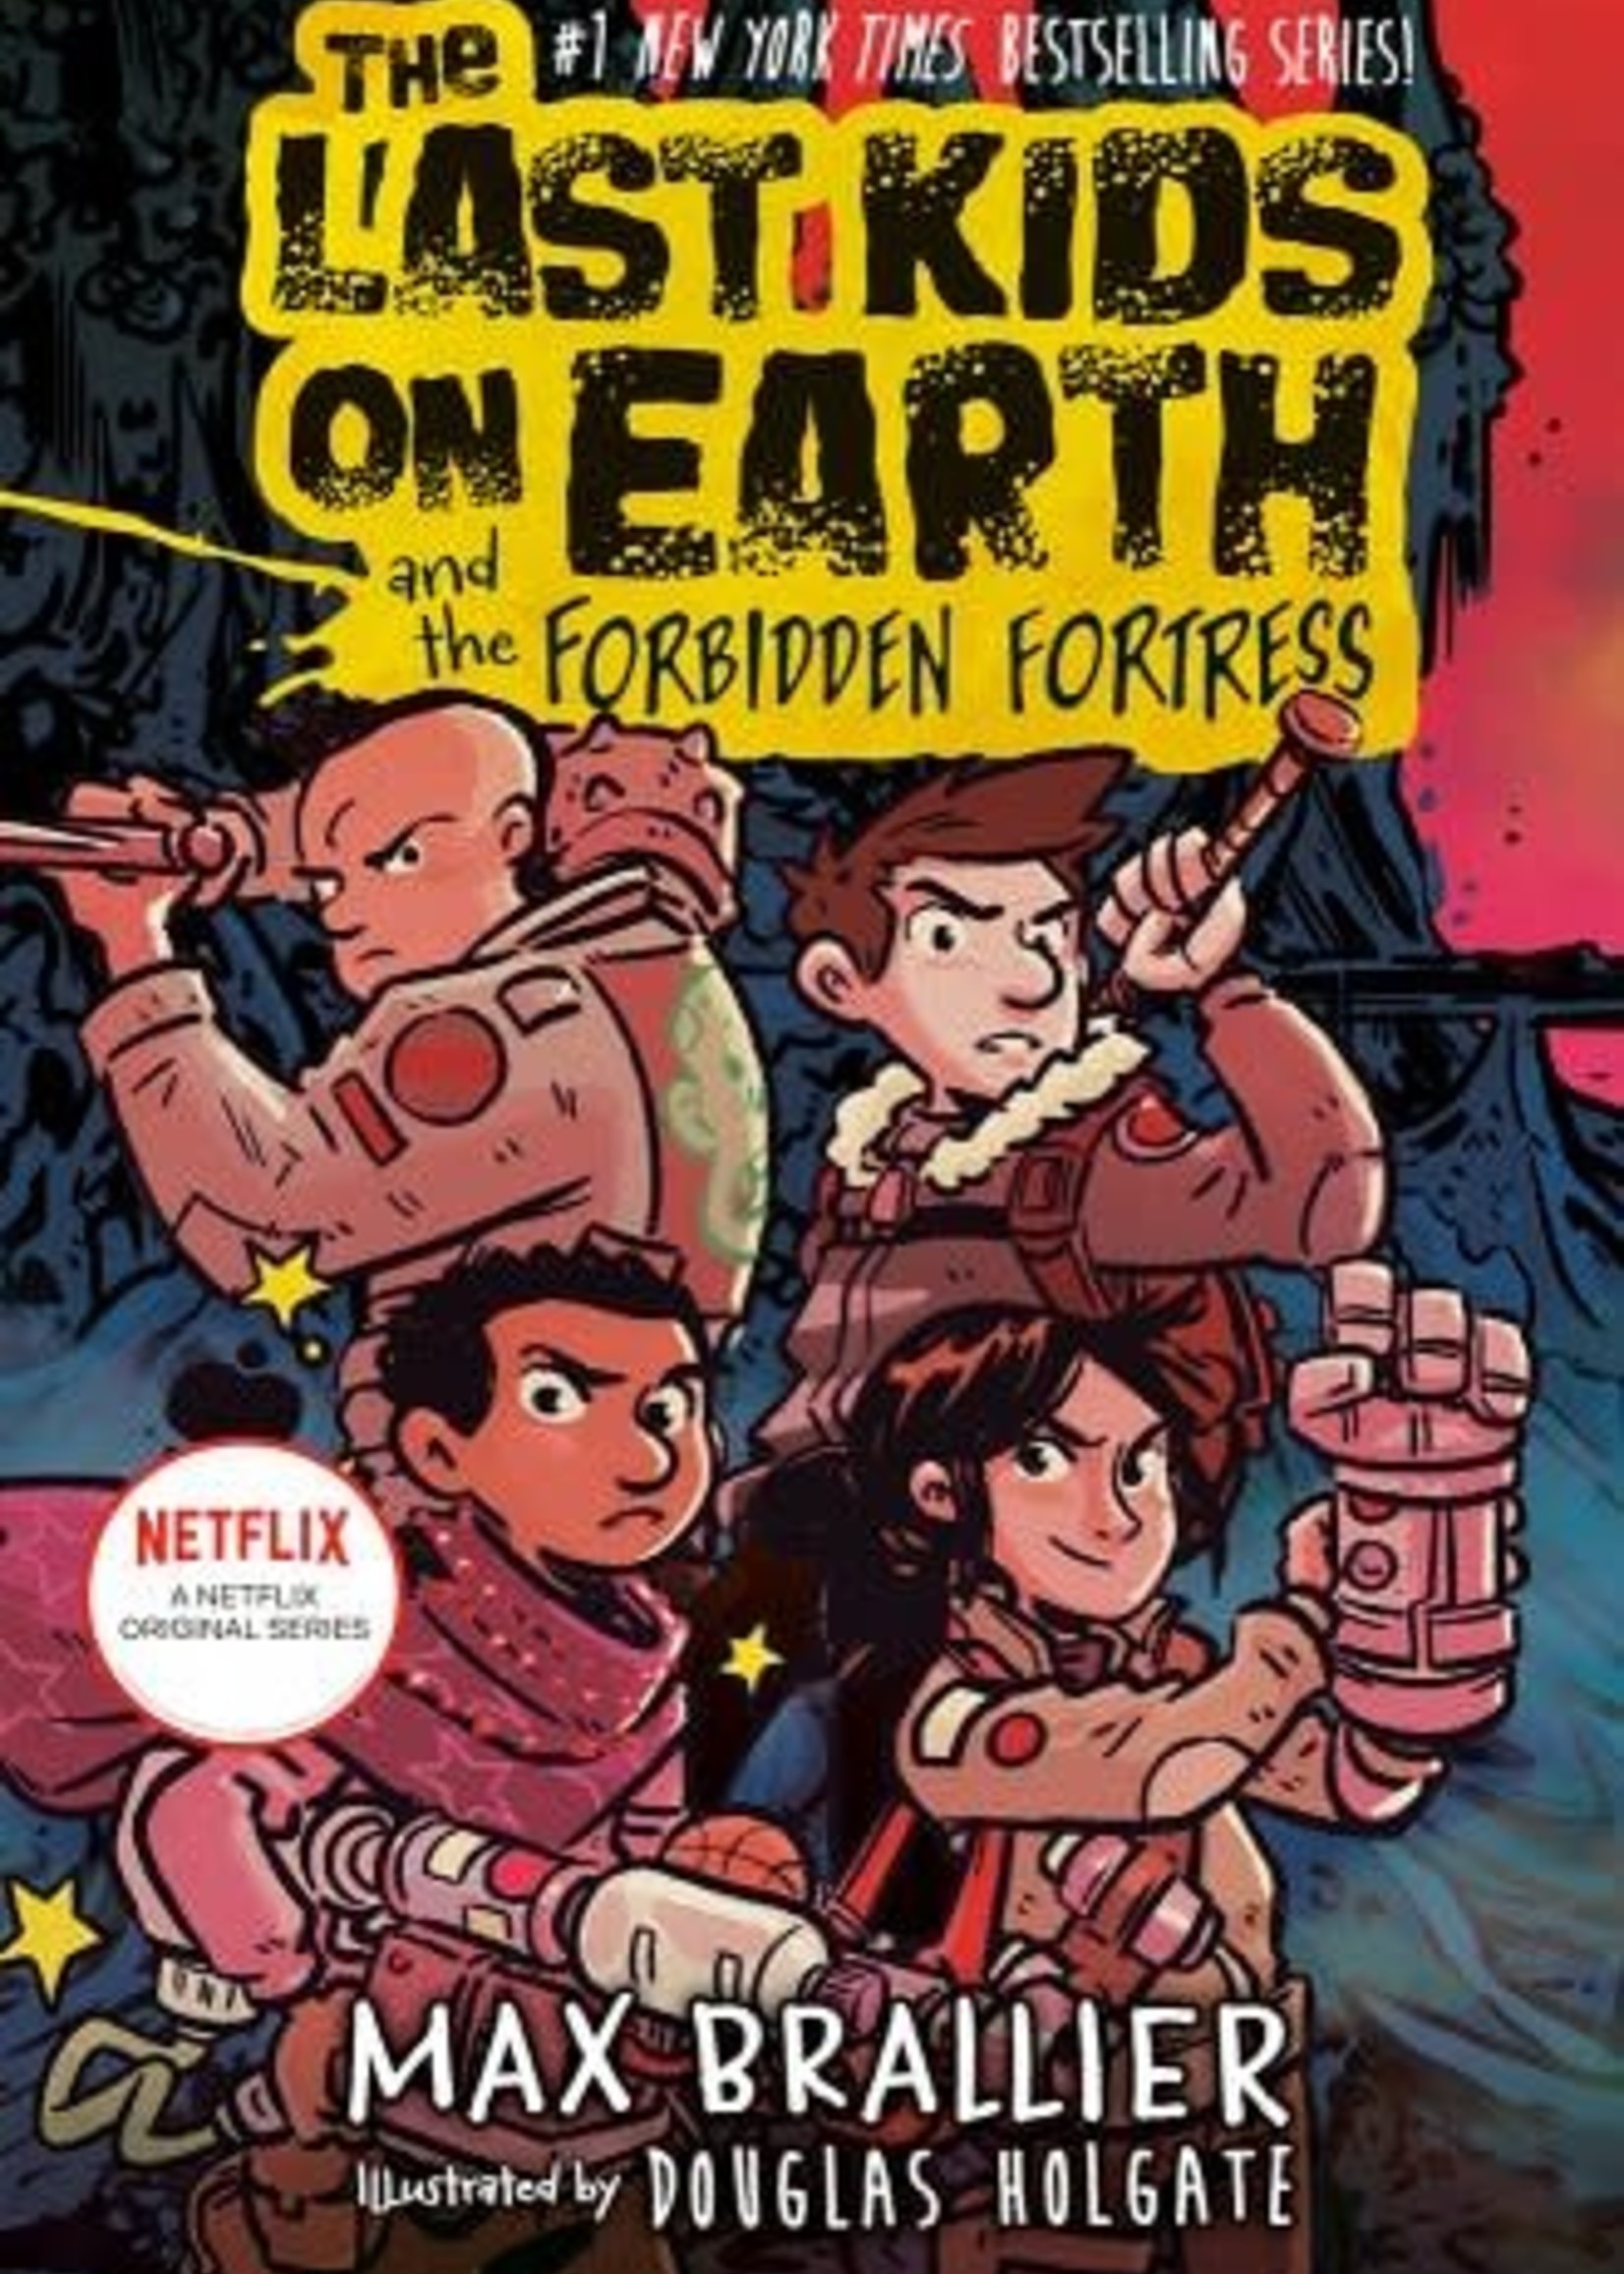 The Last Kids on Earth 8 Forbidden Fortress, Book 8